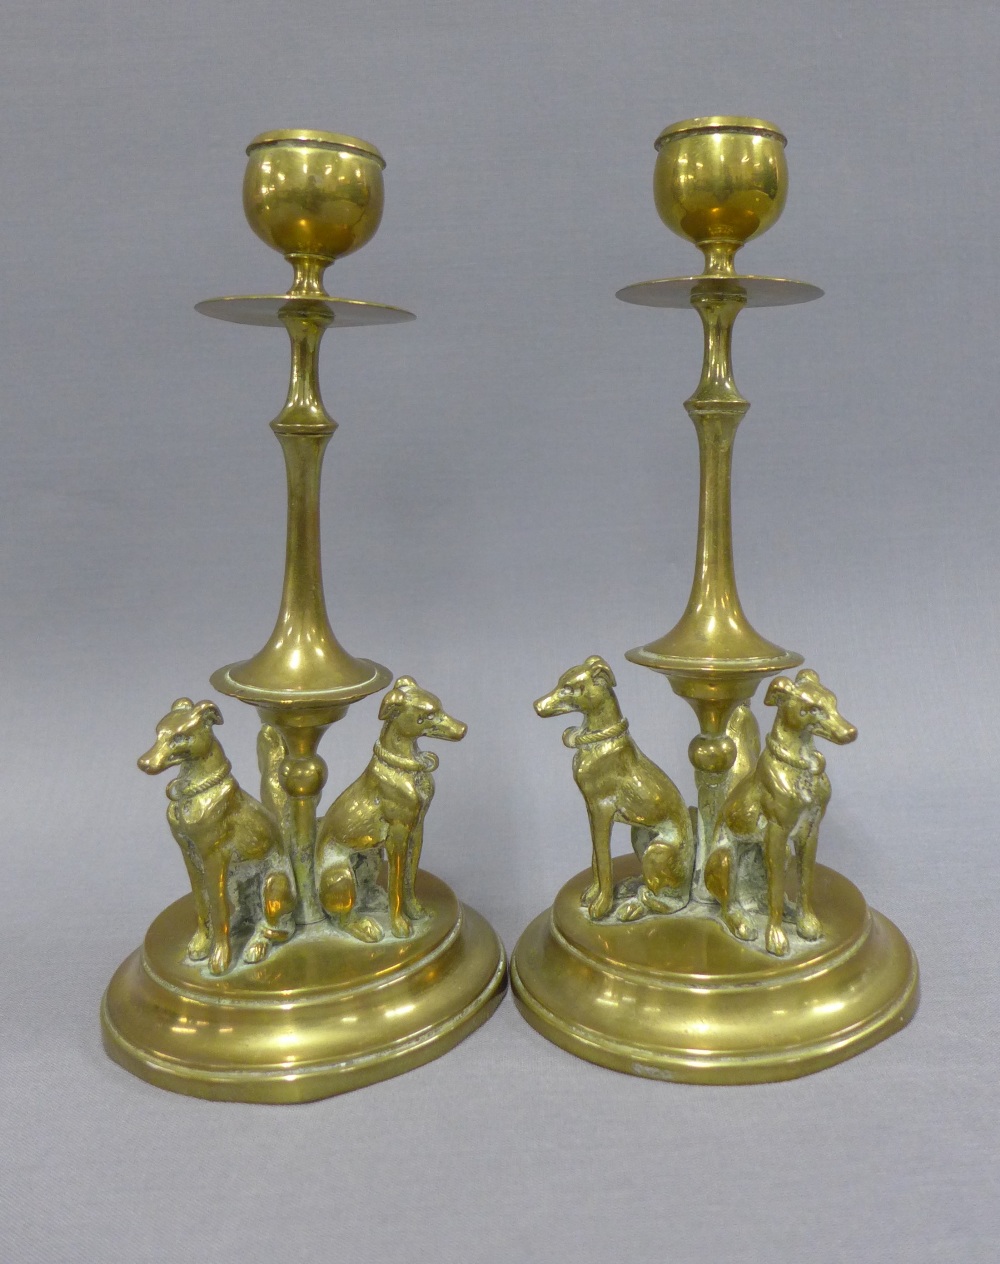 Pair of brass knop stemmed candlesticks, the circular bases with three hounds, 19cm (2) - Image 2 of 2